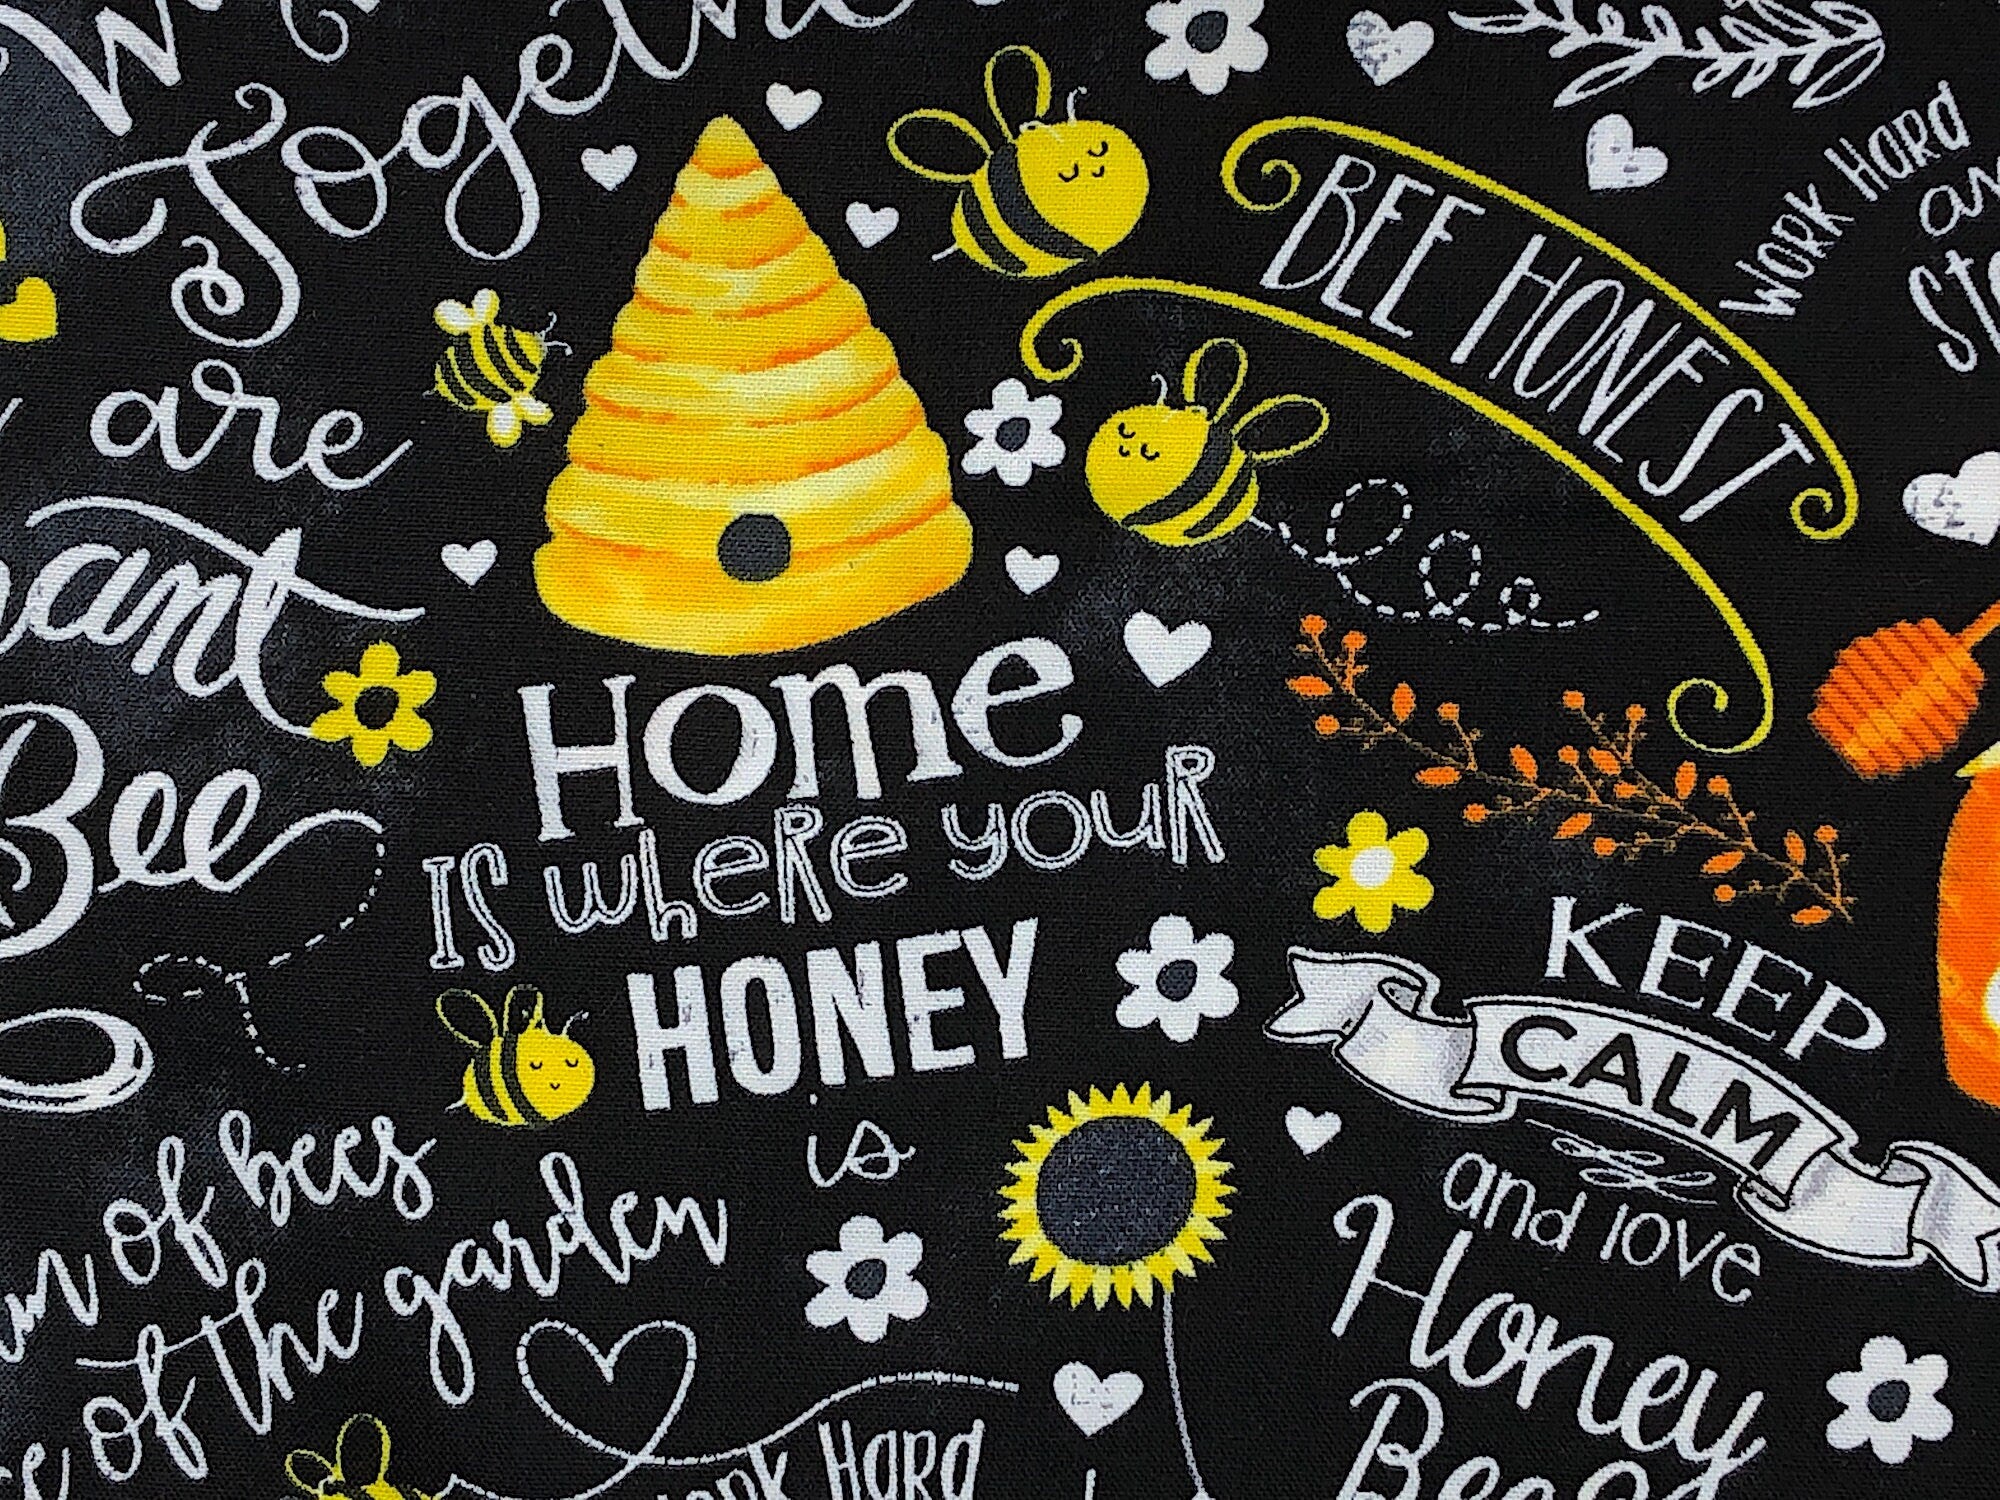 Close up of bees and sayings such as home is where your honey, keep calm and more.